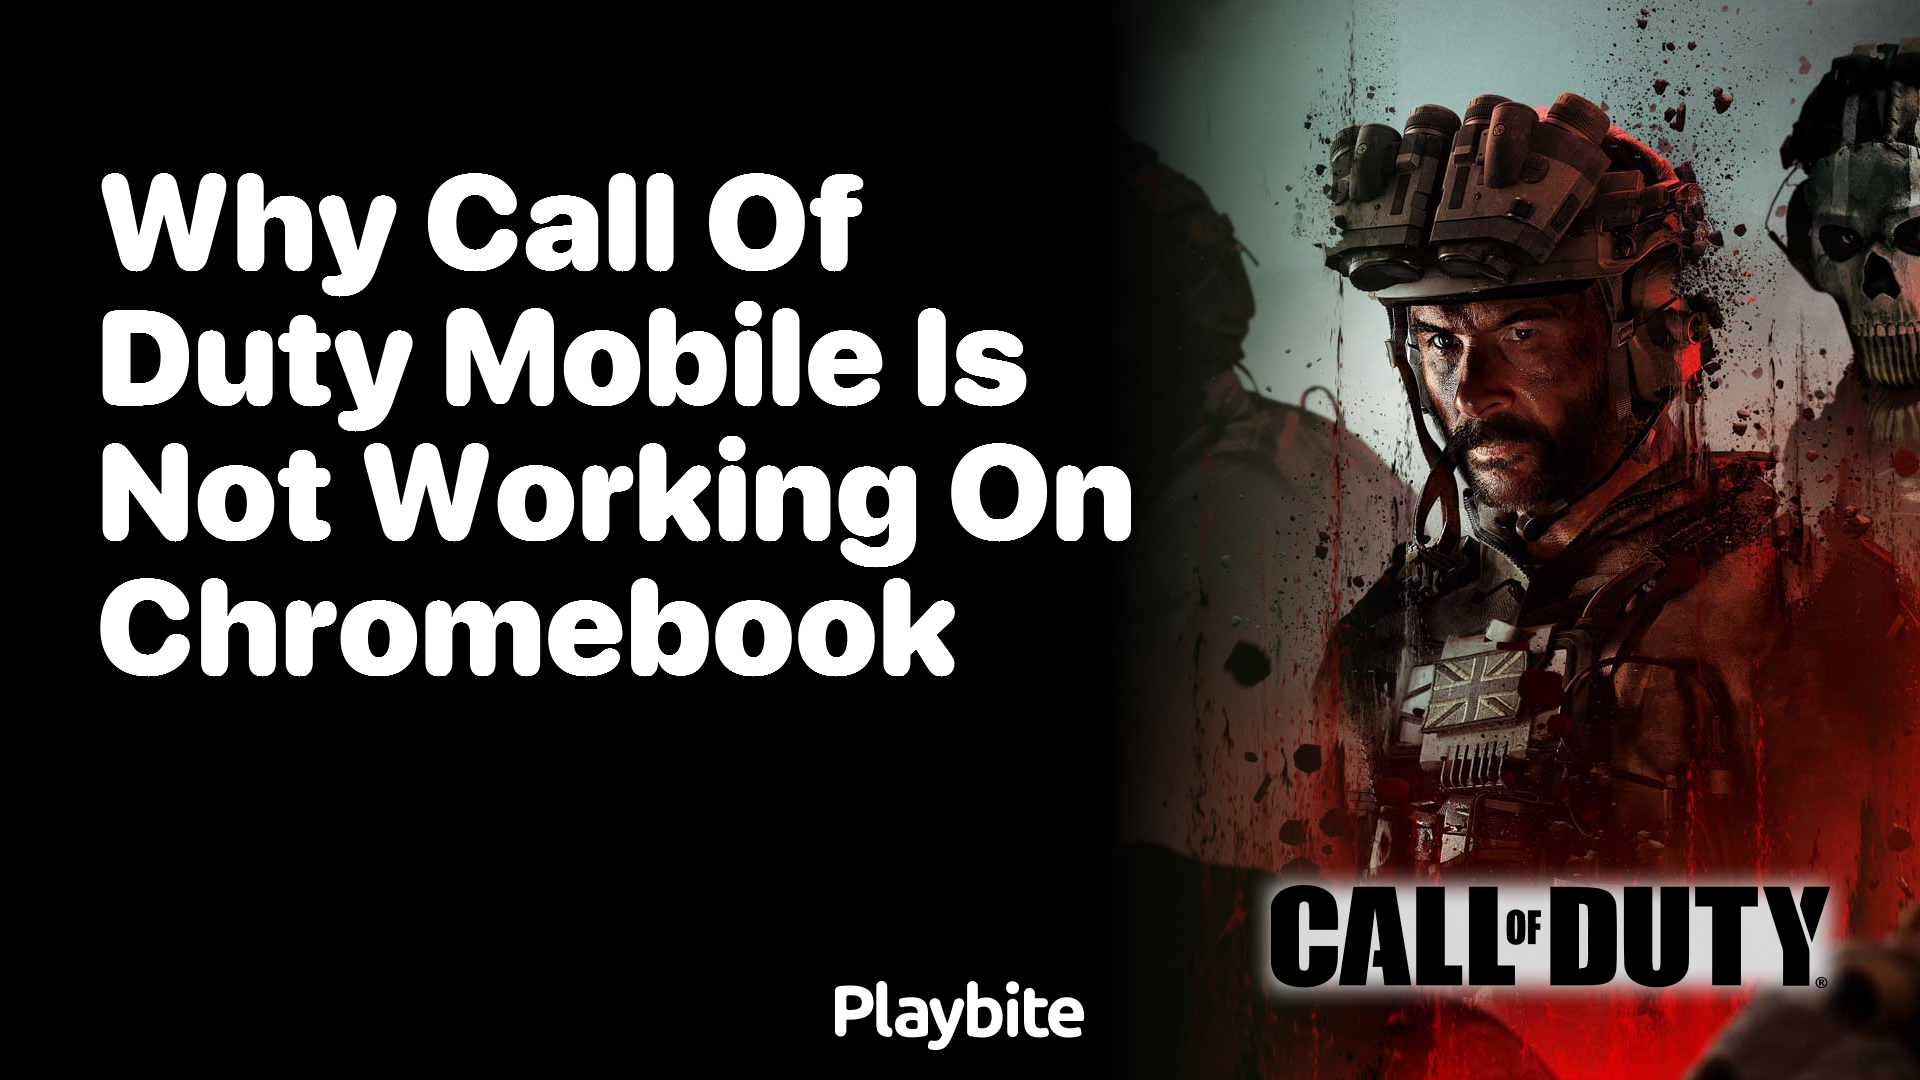 Why Call of Duty Mobile Is Not Working on Chromebook?